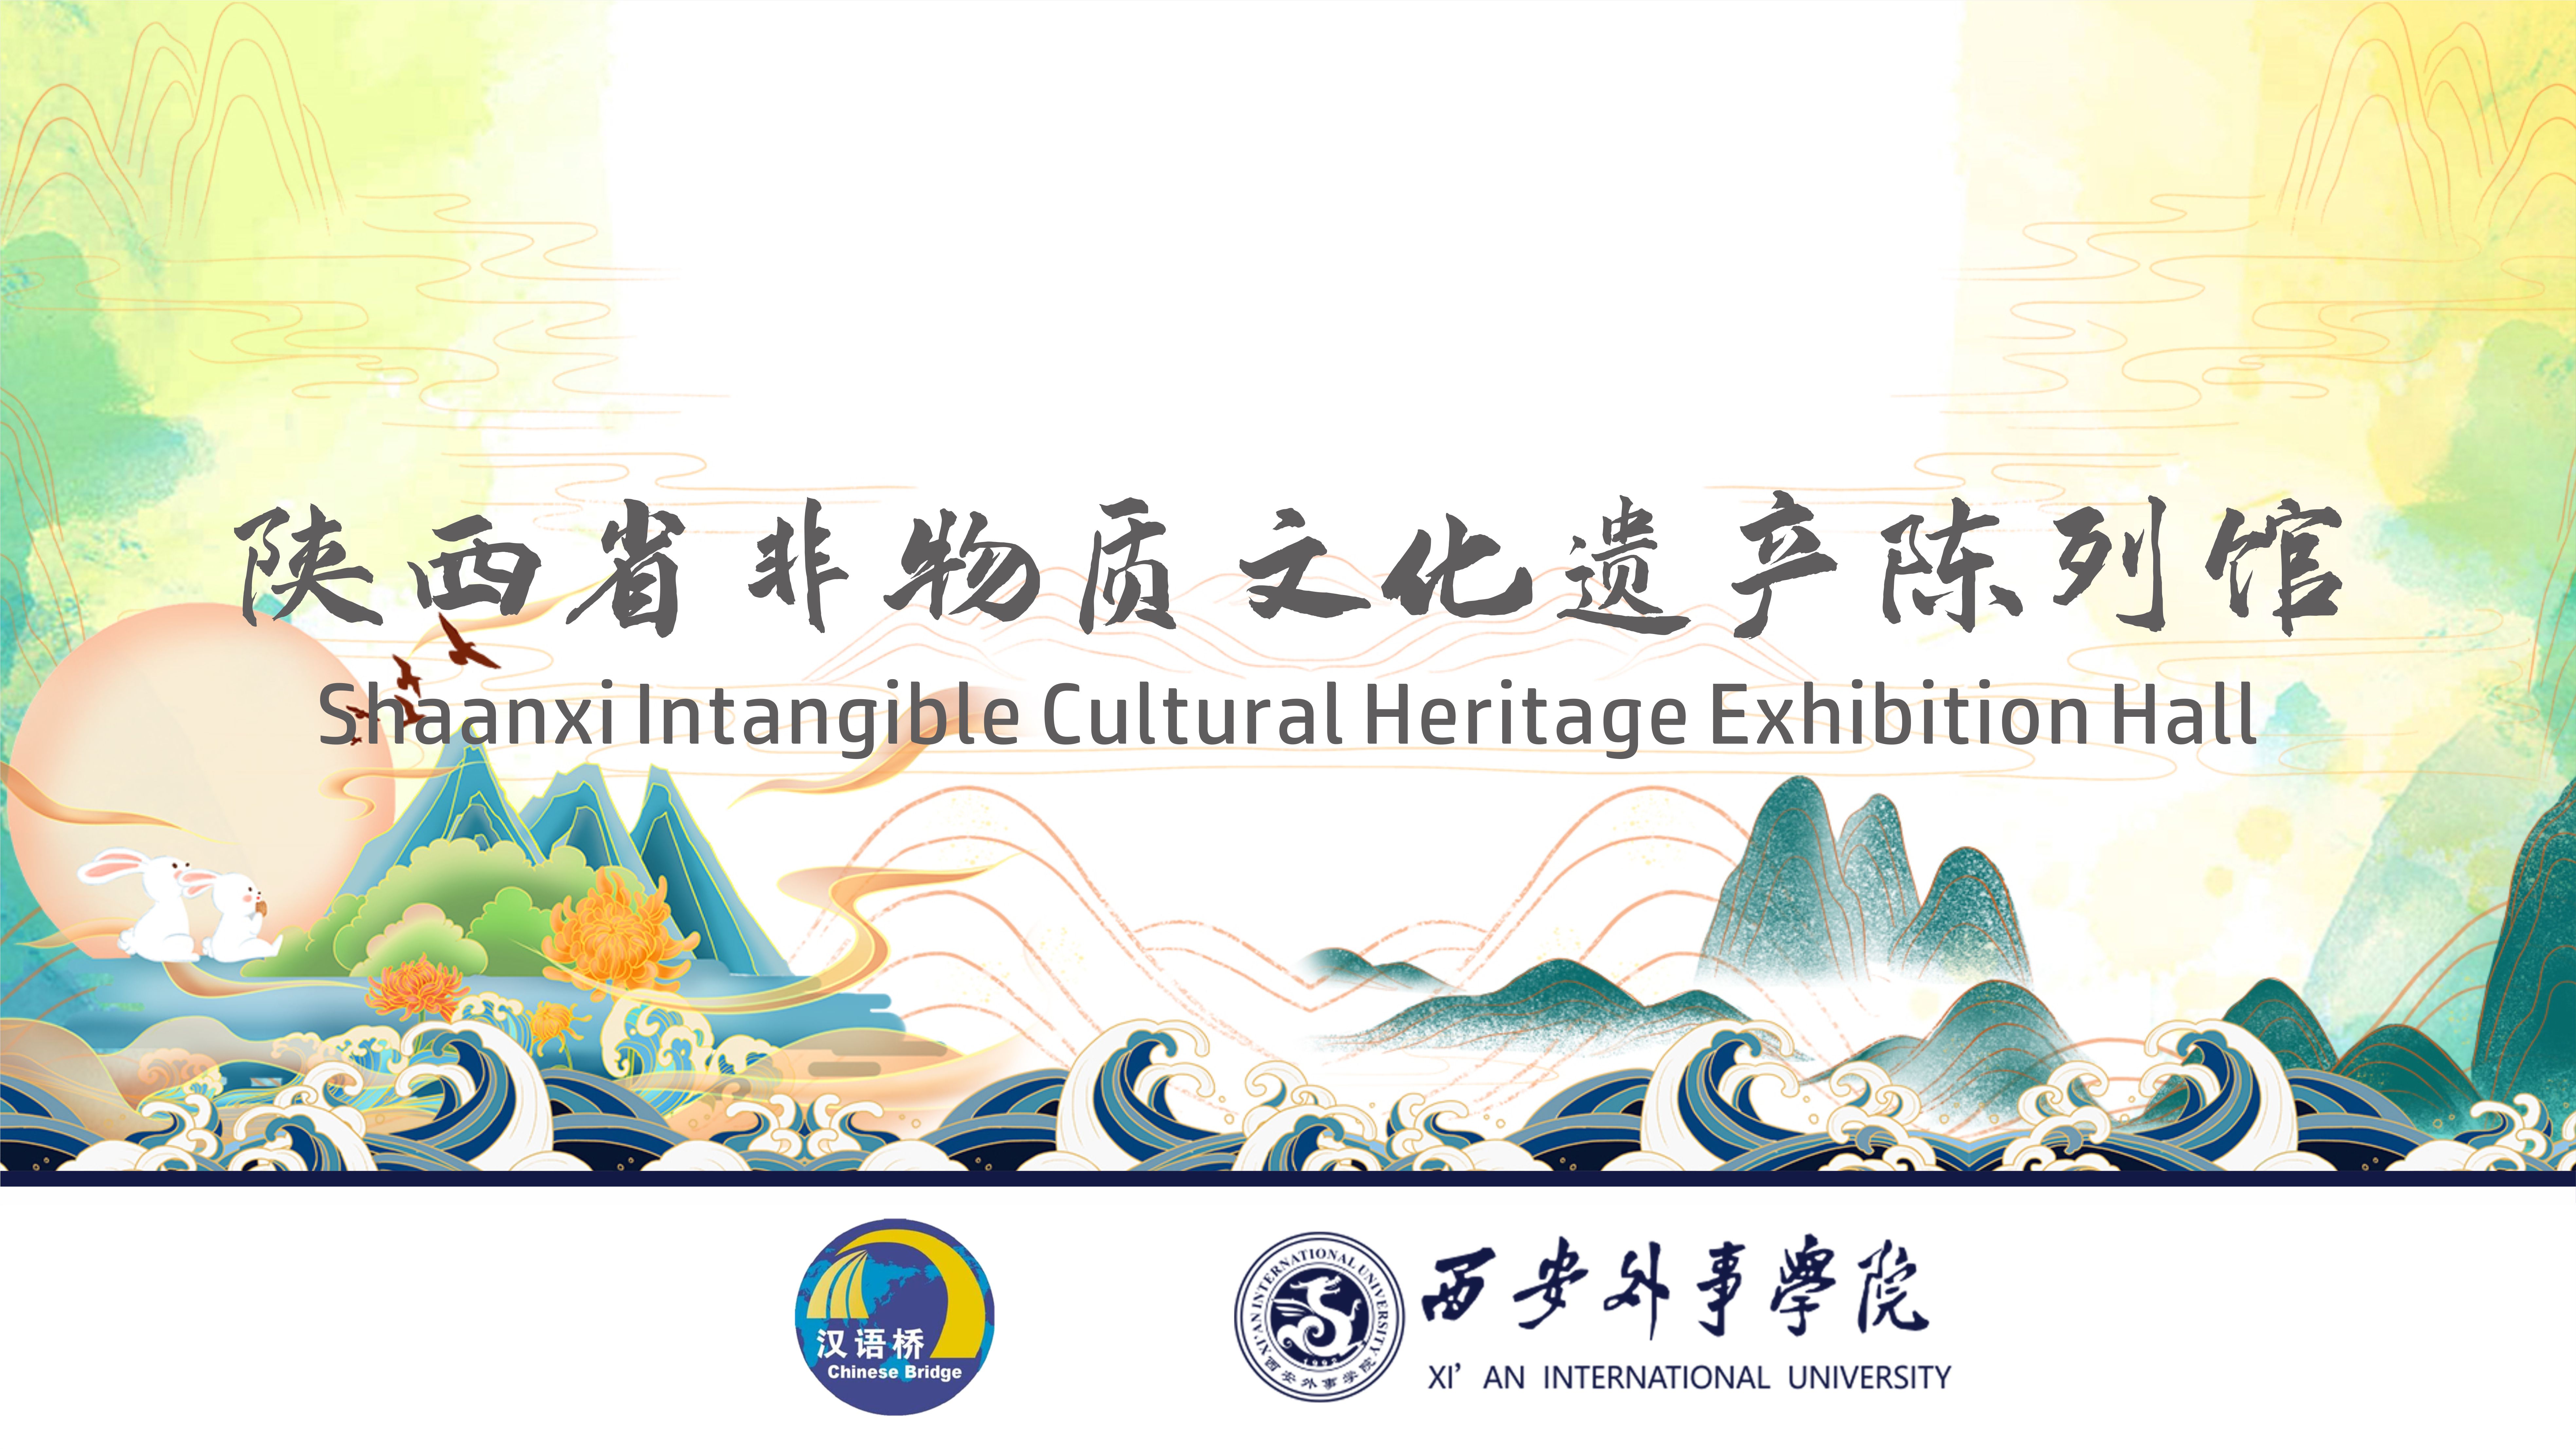 Shaanxi Intangible Cultural Heritage Exhibition Hall